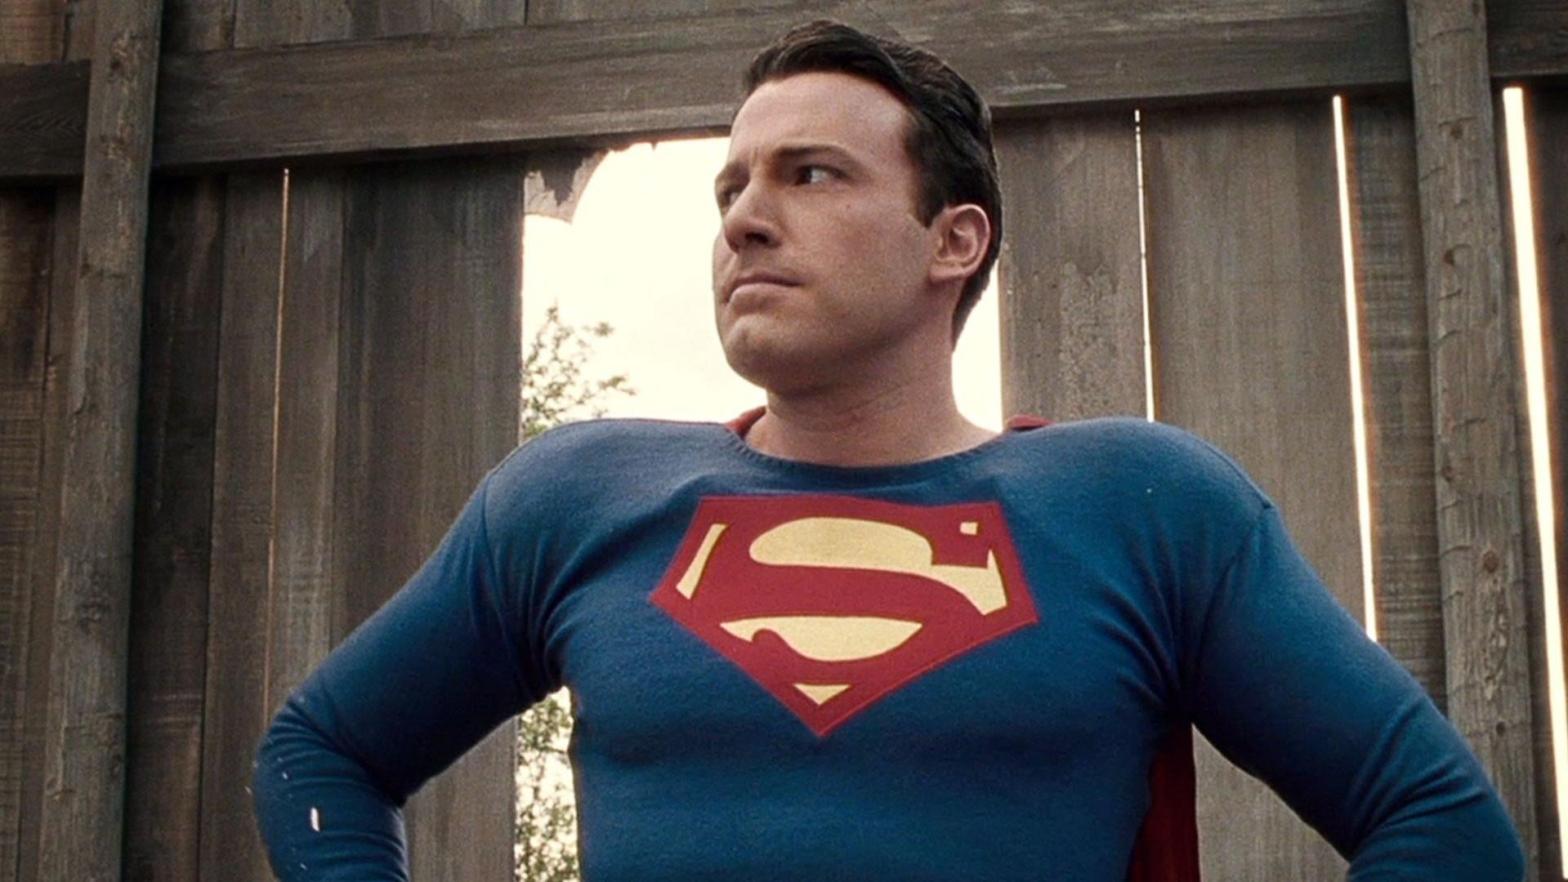 Ben Affleck as Superman? It was discussed long before 2006's Hollywoodland, seen here. (Image: Focus Features)